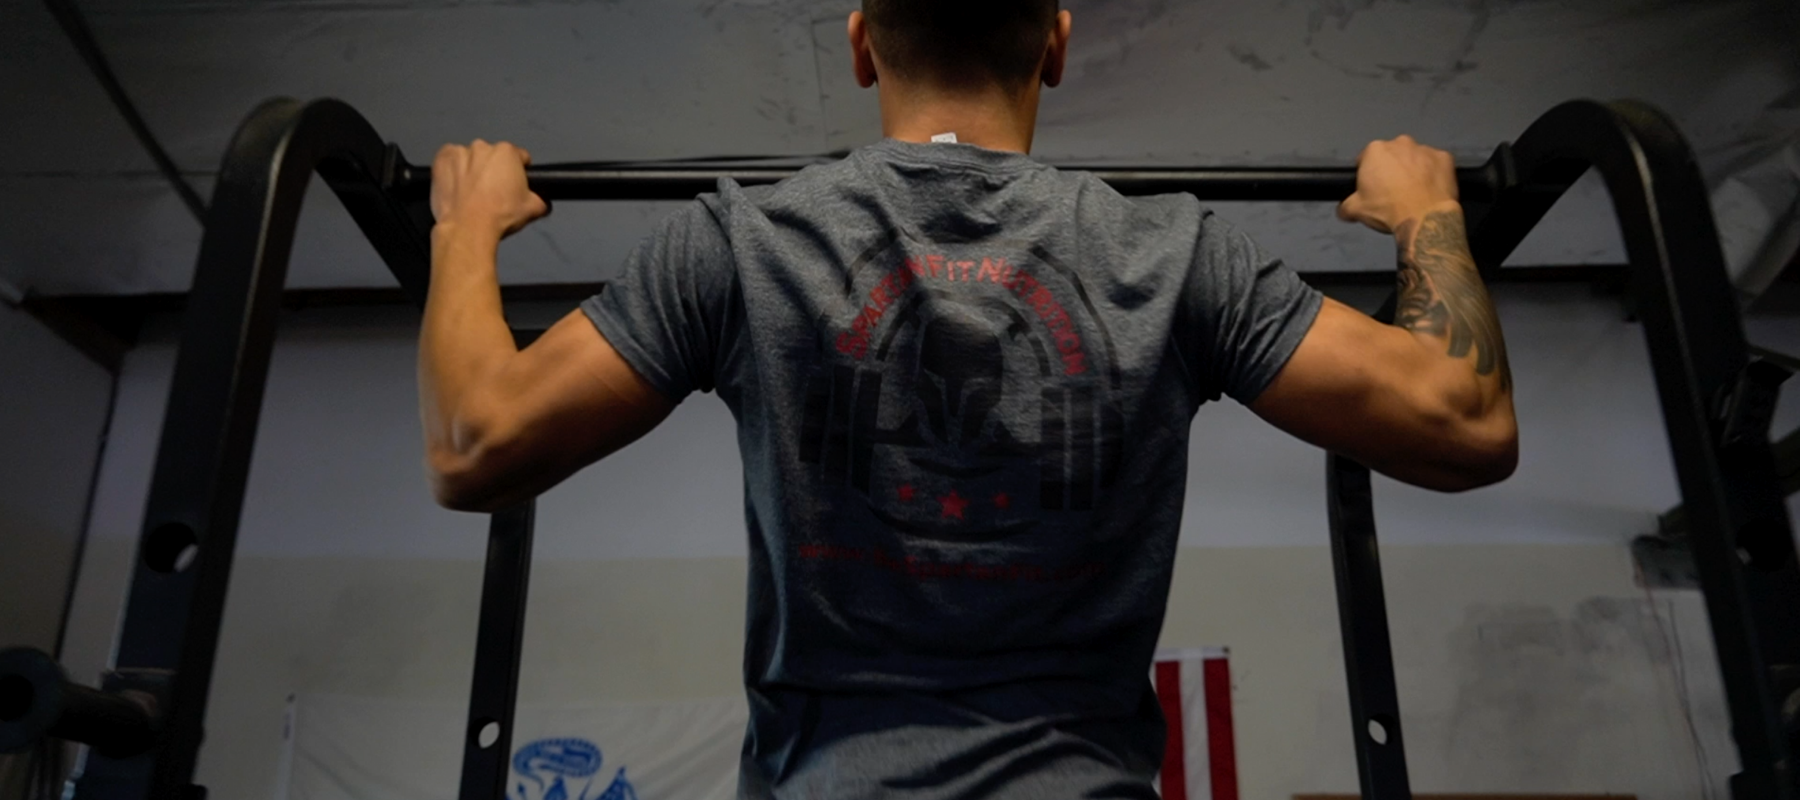 Bodybuilding athlete wearing Spartan Fit Nutrition T-Shirt doing pull up exercise at Fitness Gym.